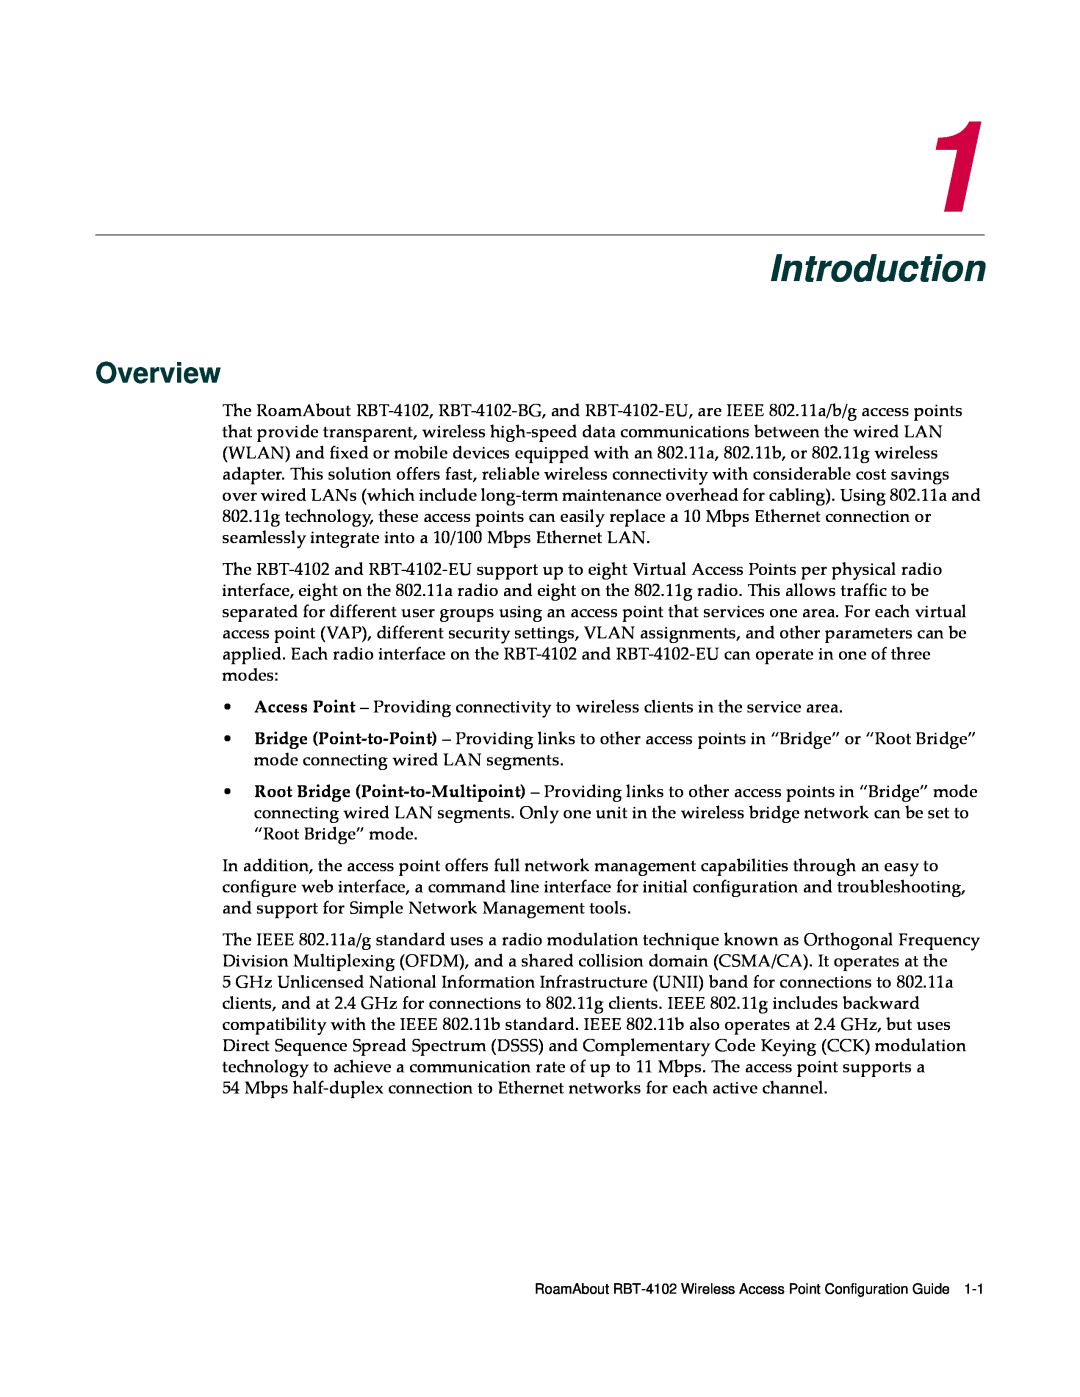 Enterasys Networks RBT-4102 manual Introduction, Overview 